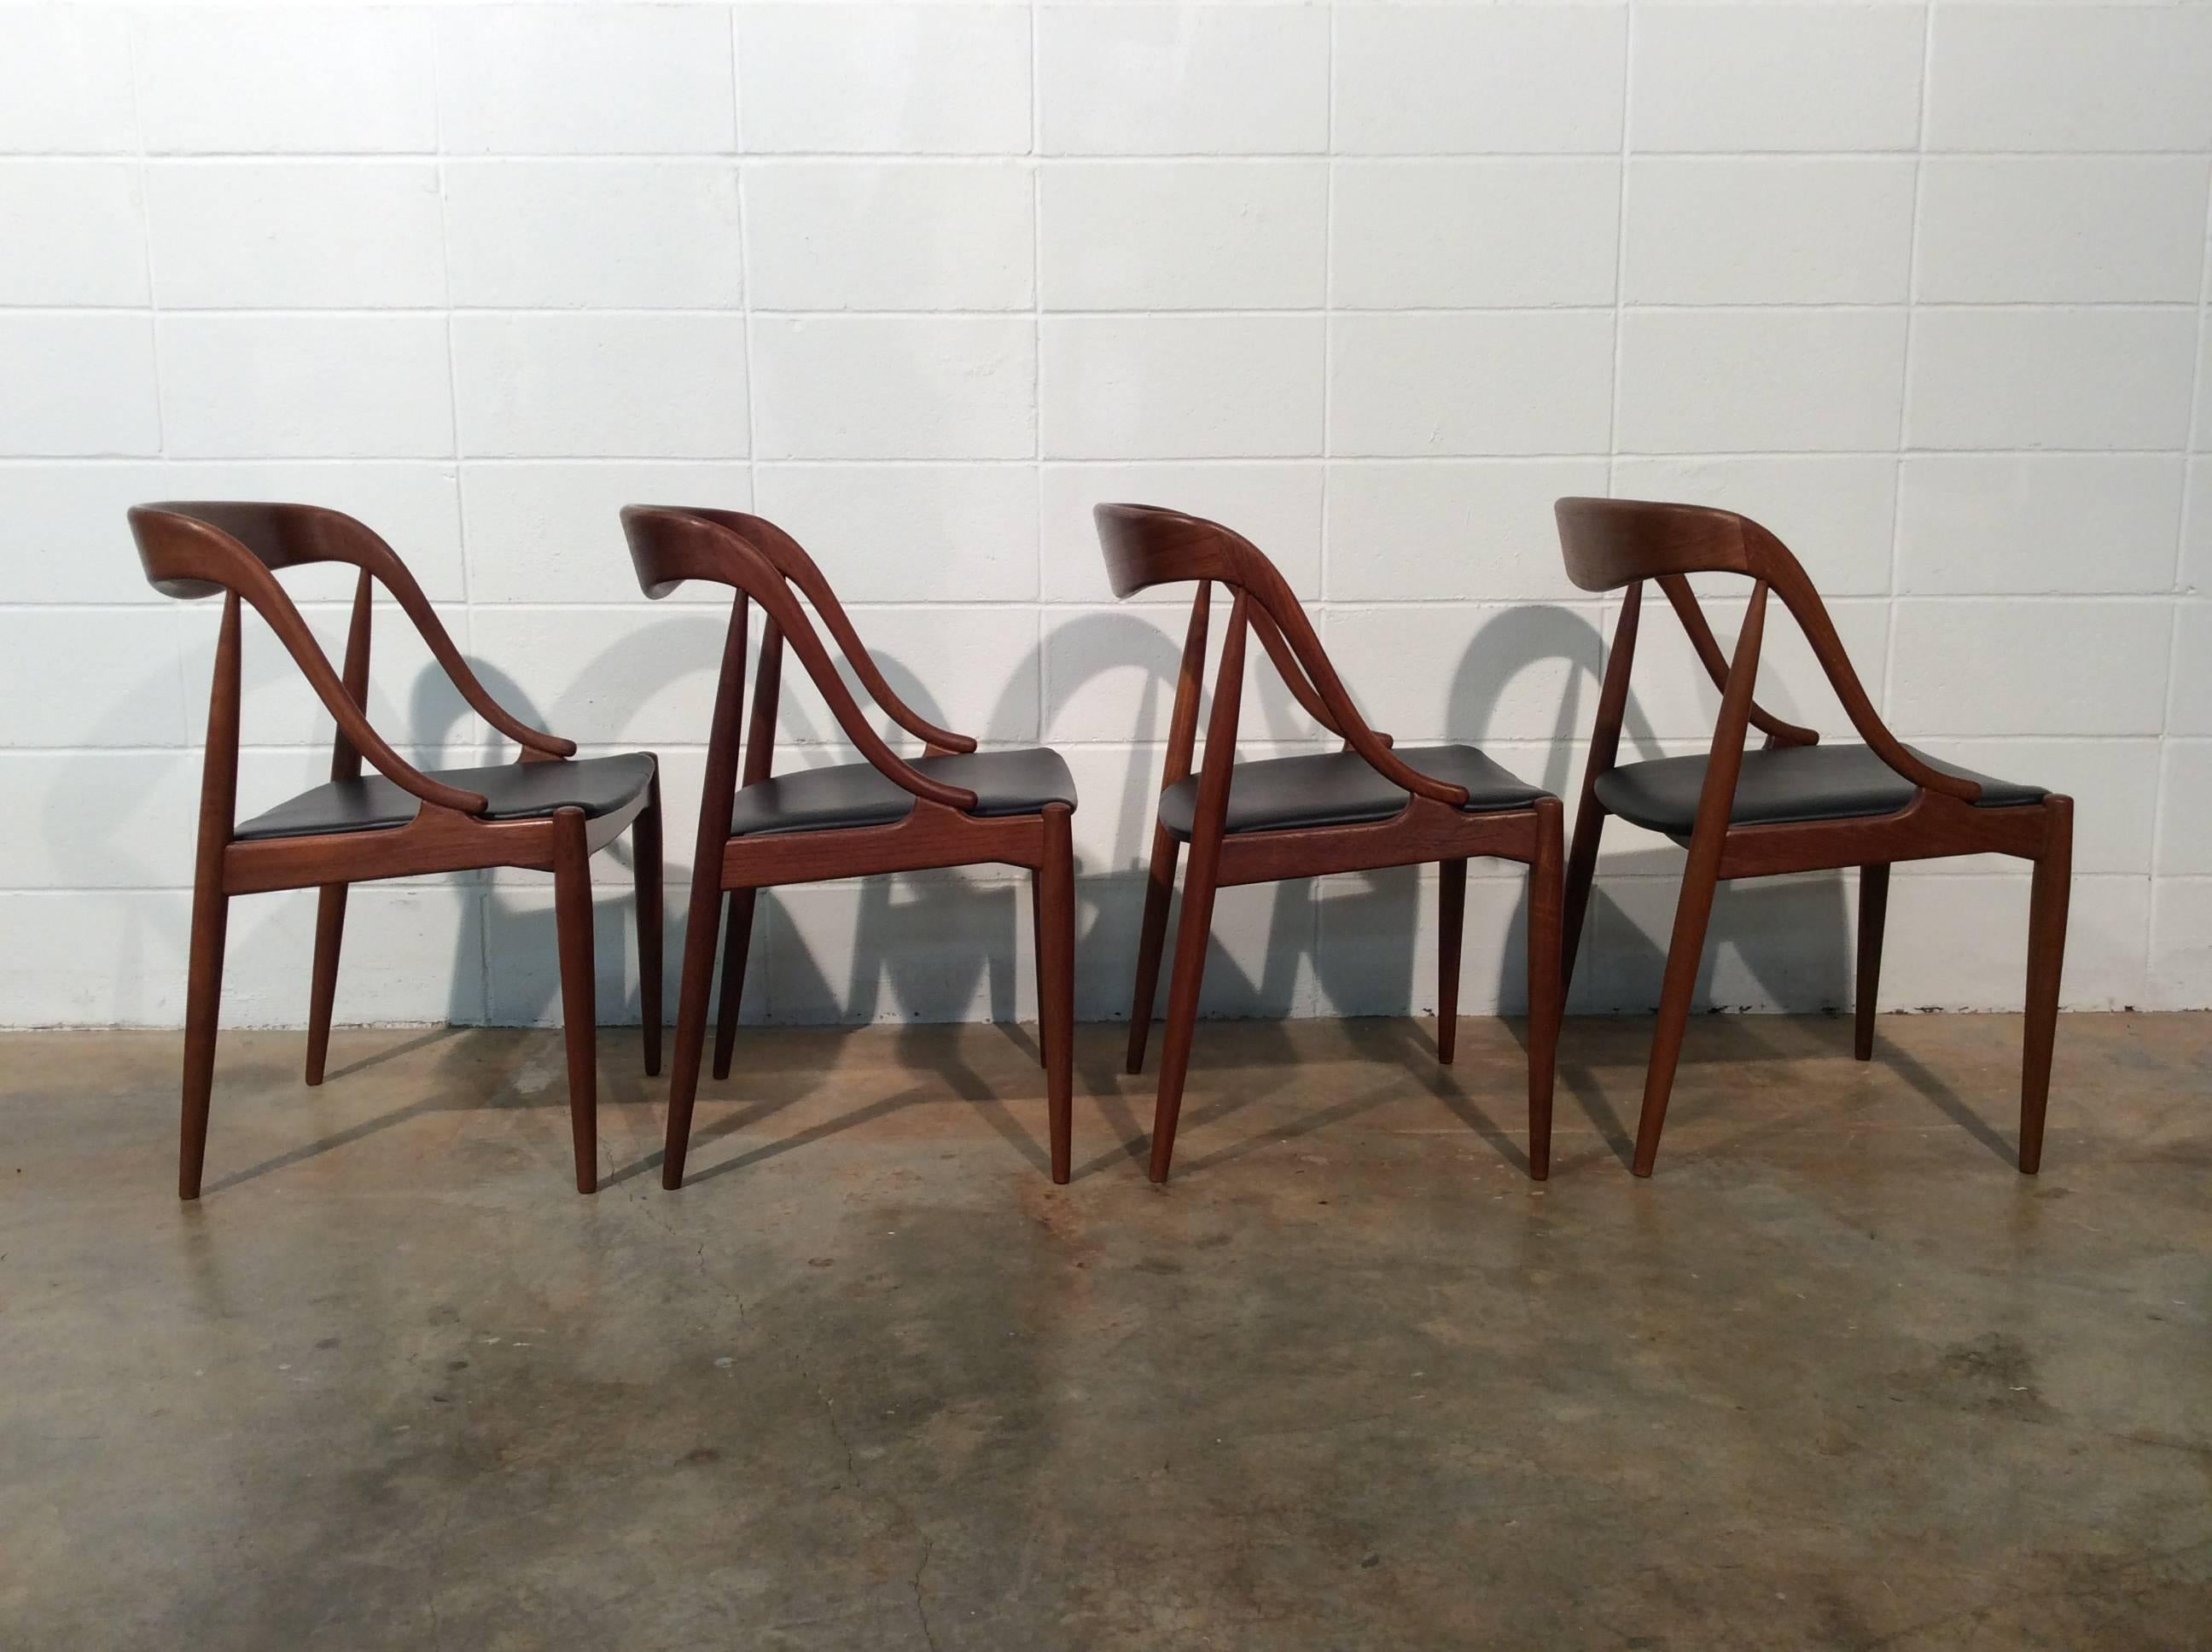 Set of four teak dining chairs designed by Johannes Andersen for / imported by Moreddi. The chairs have been thoroughly cleaned and oiled and are ready for use. They retain their original black vinyl, which is in great condition, as well as the